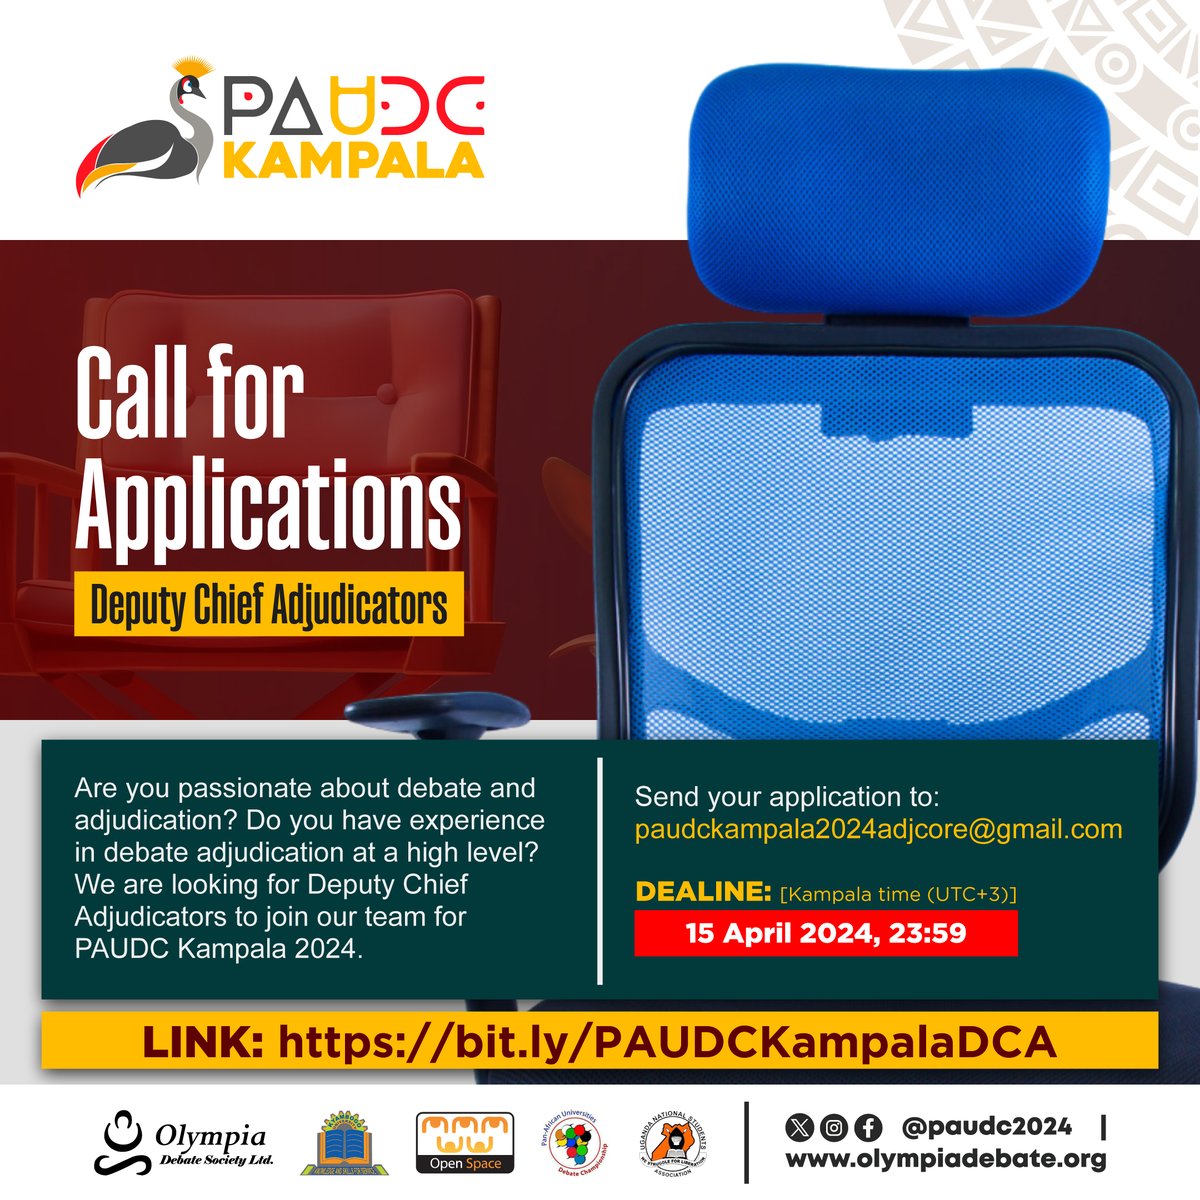 🌟 Call for Applications:🌟 Deputy Chief Adjudicators for PAUDC Kampala 2024! Are you passionate about debate and adjudication? Do you have a strong background in high-level debate adjudication? We are excited to invite you to join our team for PAUDC Kampala 2024 as a Deputy